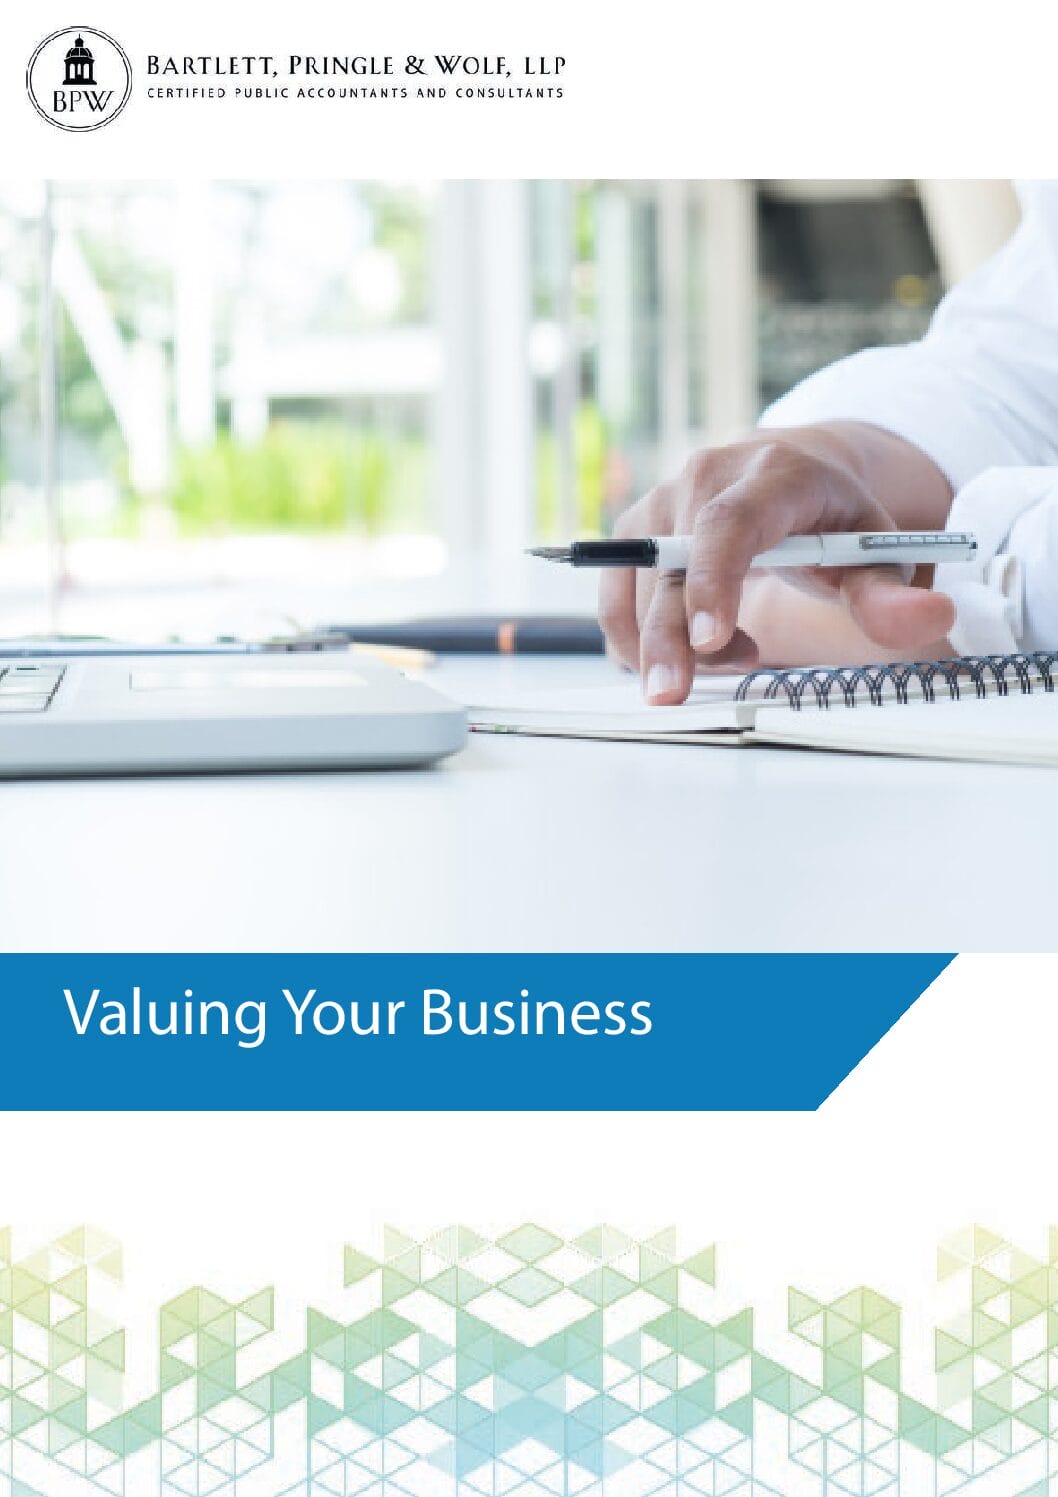 valuing-your-business-whitepaper-pdf